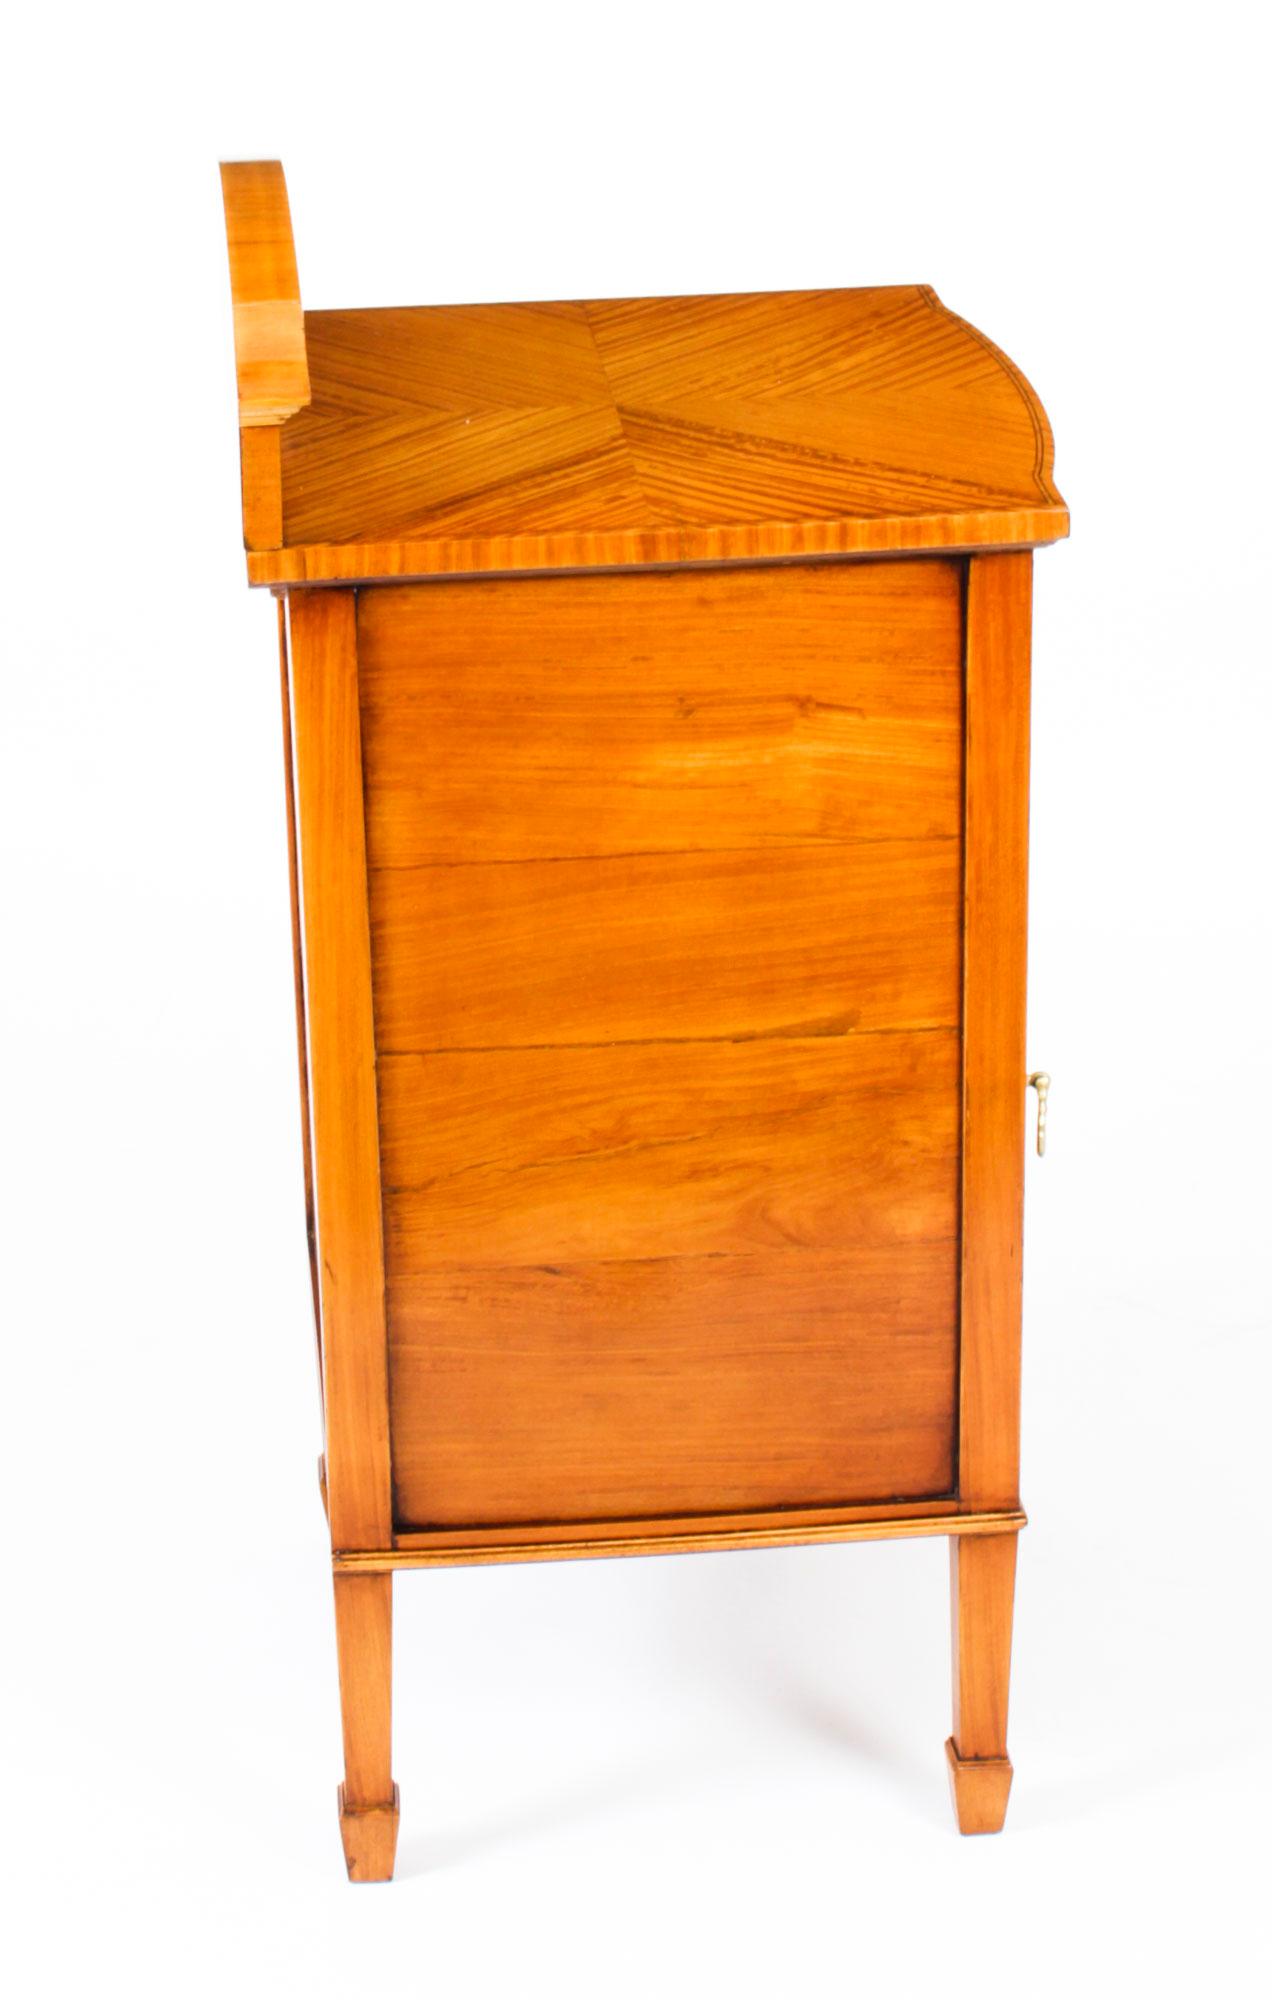 Antique Satinwood and Inlaid Bedside Cabinet, 19th Century For Sale 7